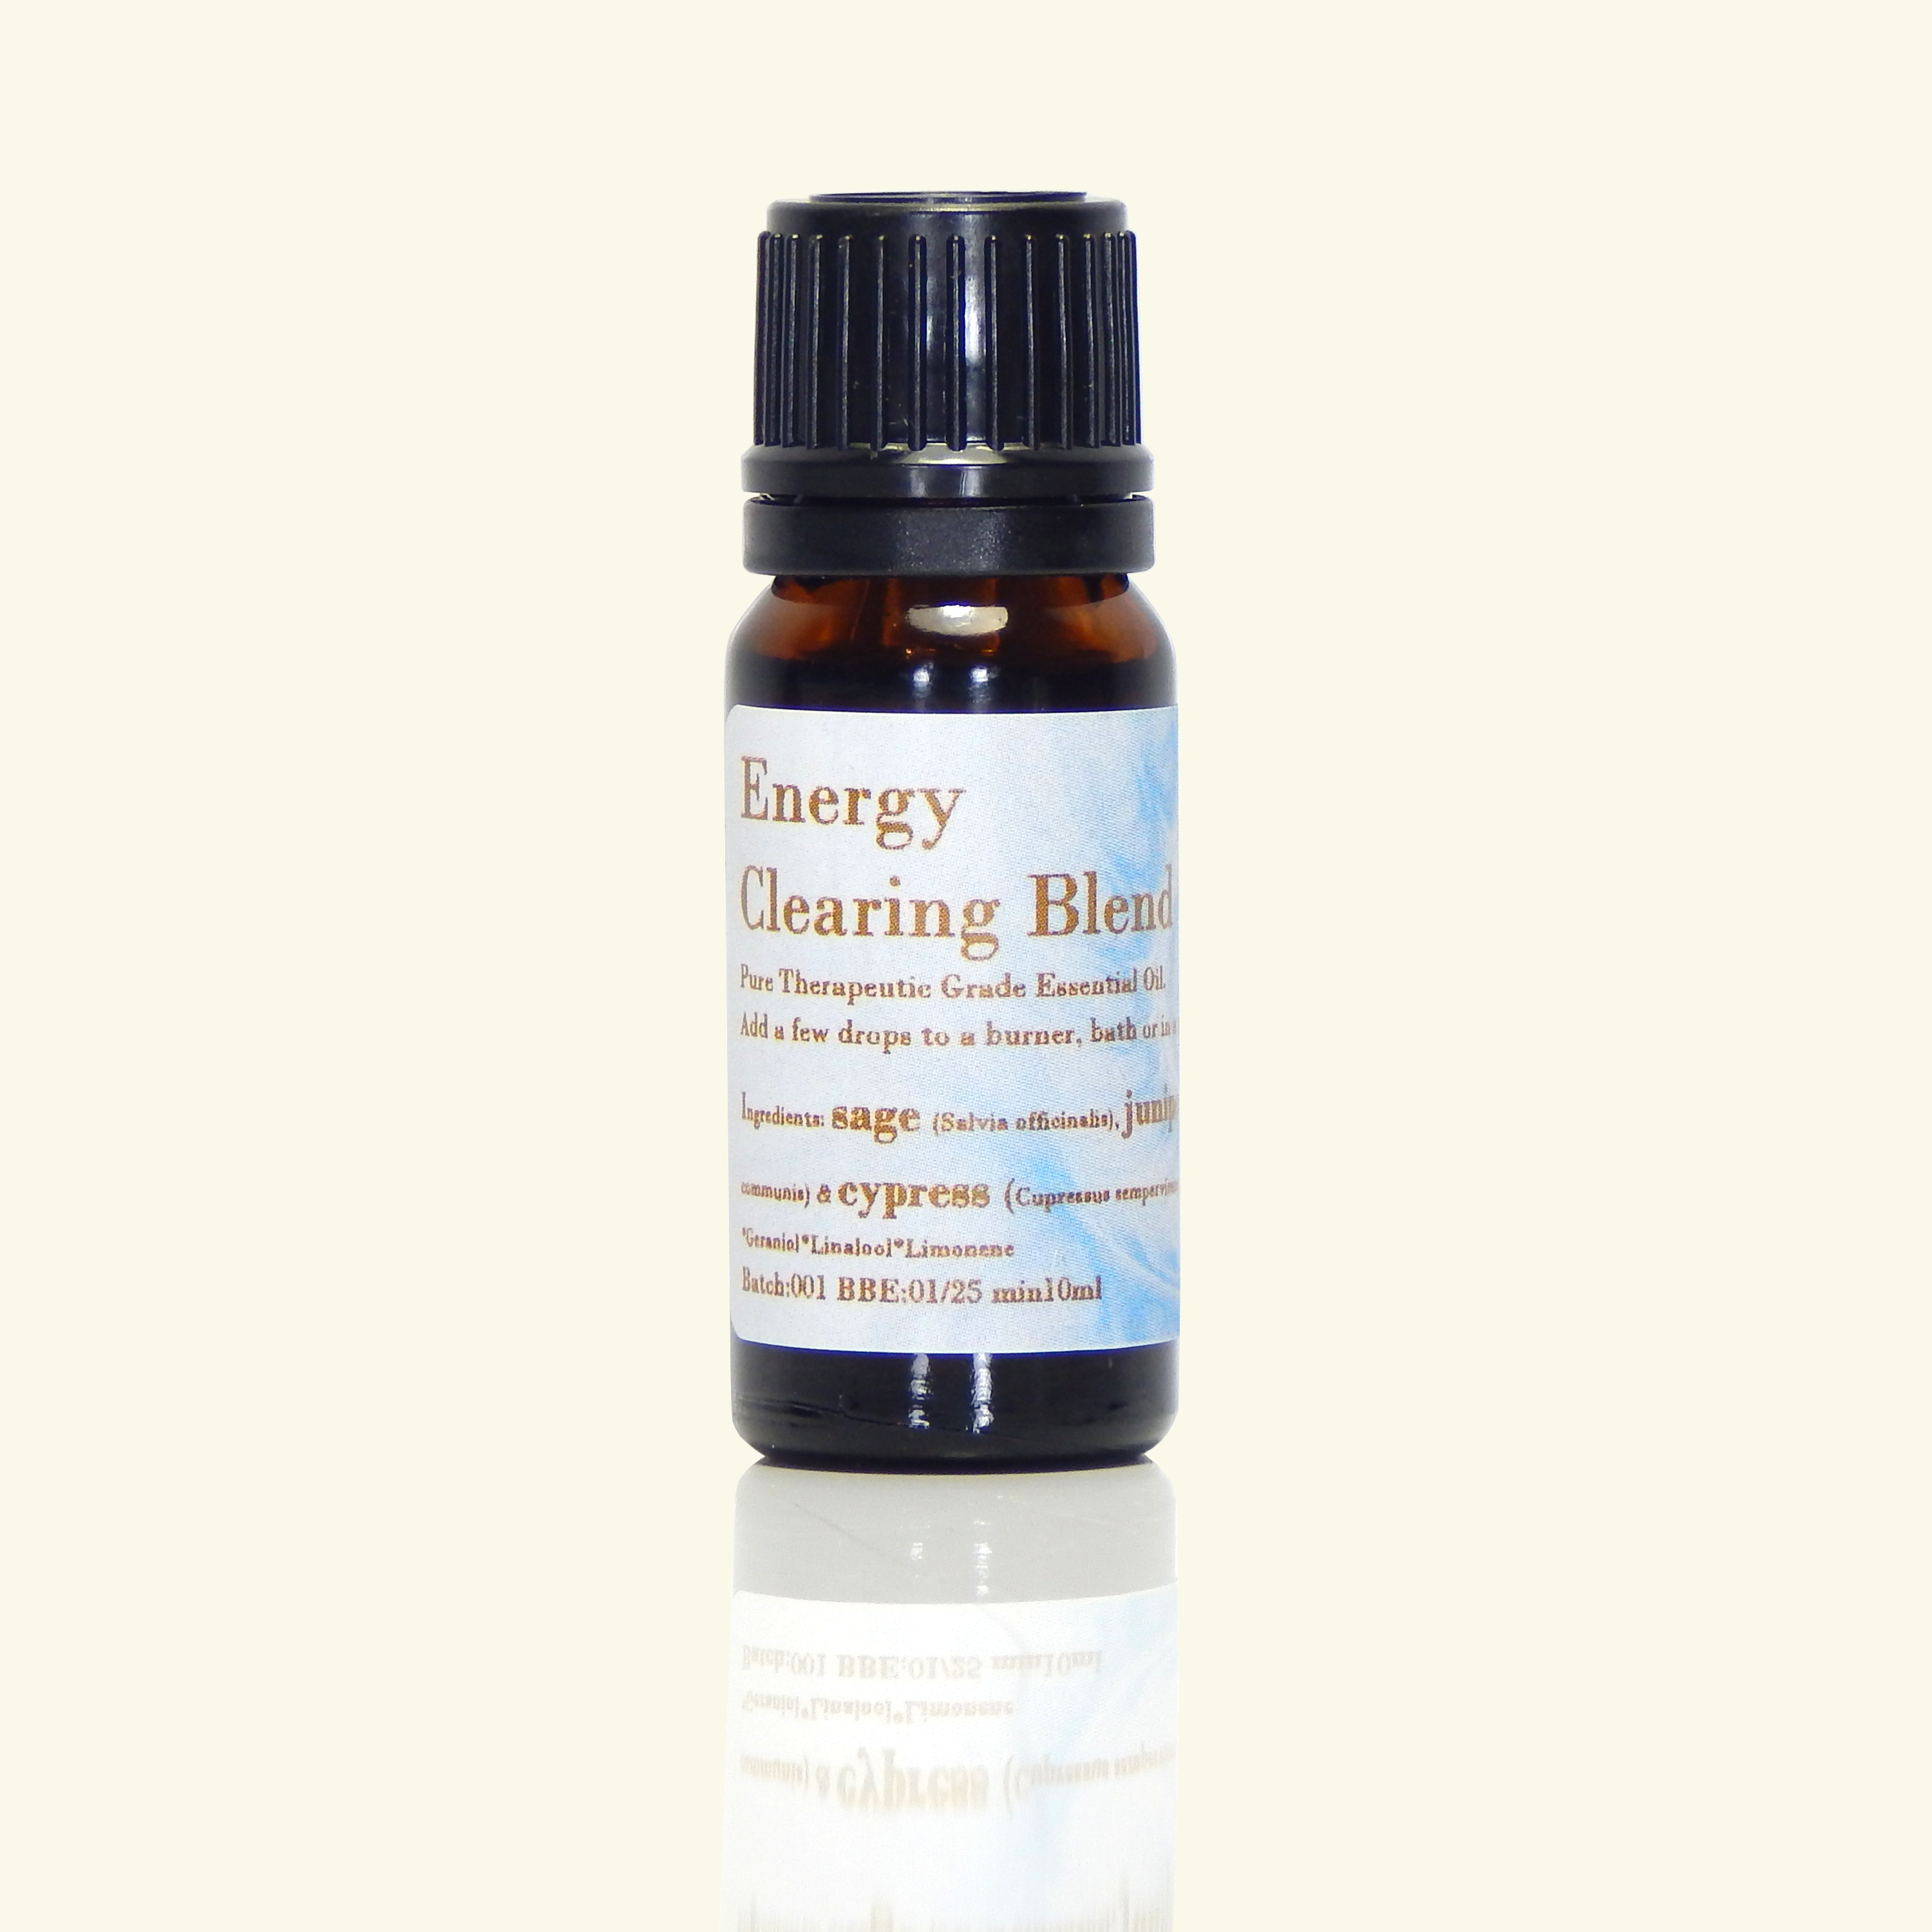 Energy Clearing Blend